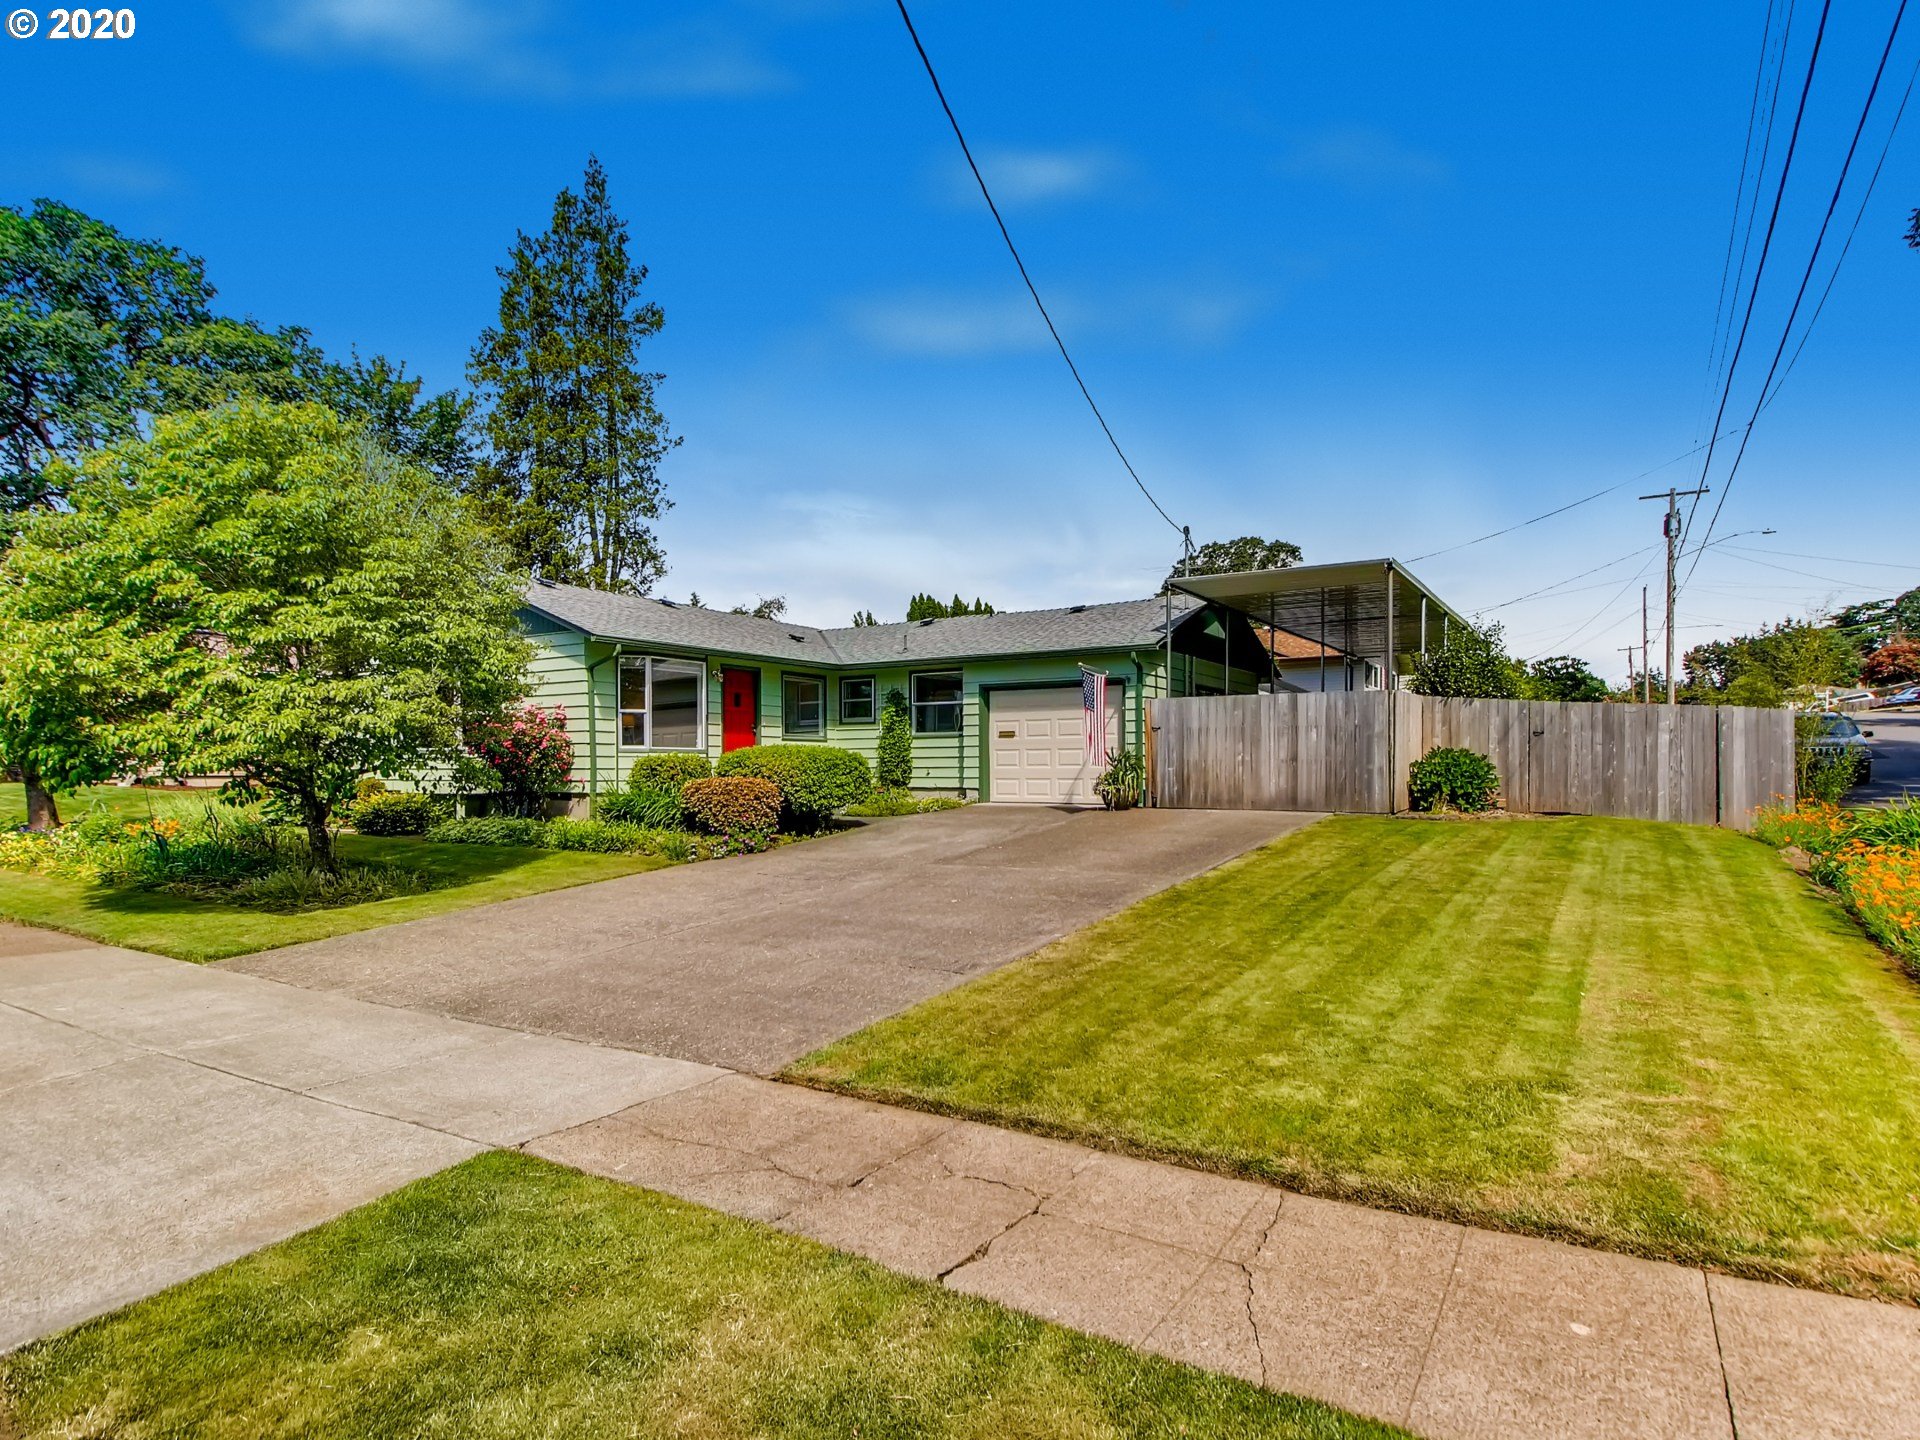 520 E HEREFORD ST (1 of 27)